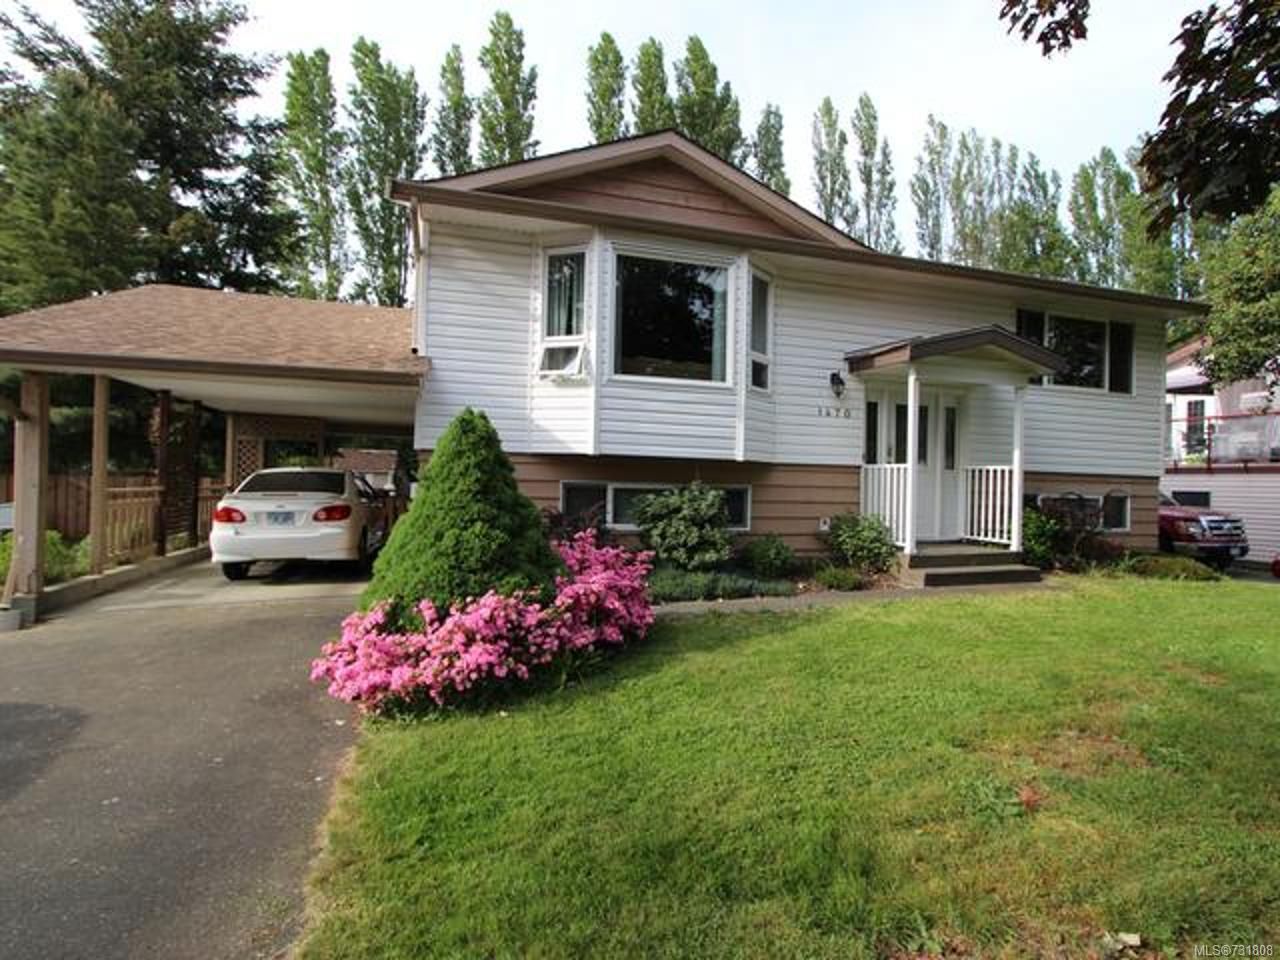 Main Photo: 1470 Dogwood Ave in COMOX: CV Comox (Town of) House for sale (Comox Valley)  : MLS®# 731808